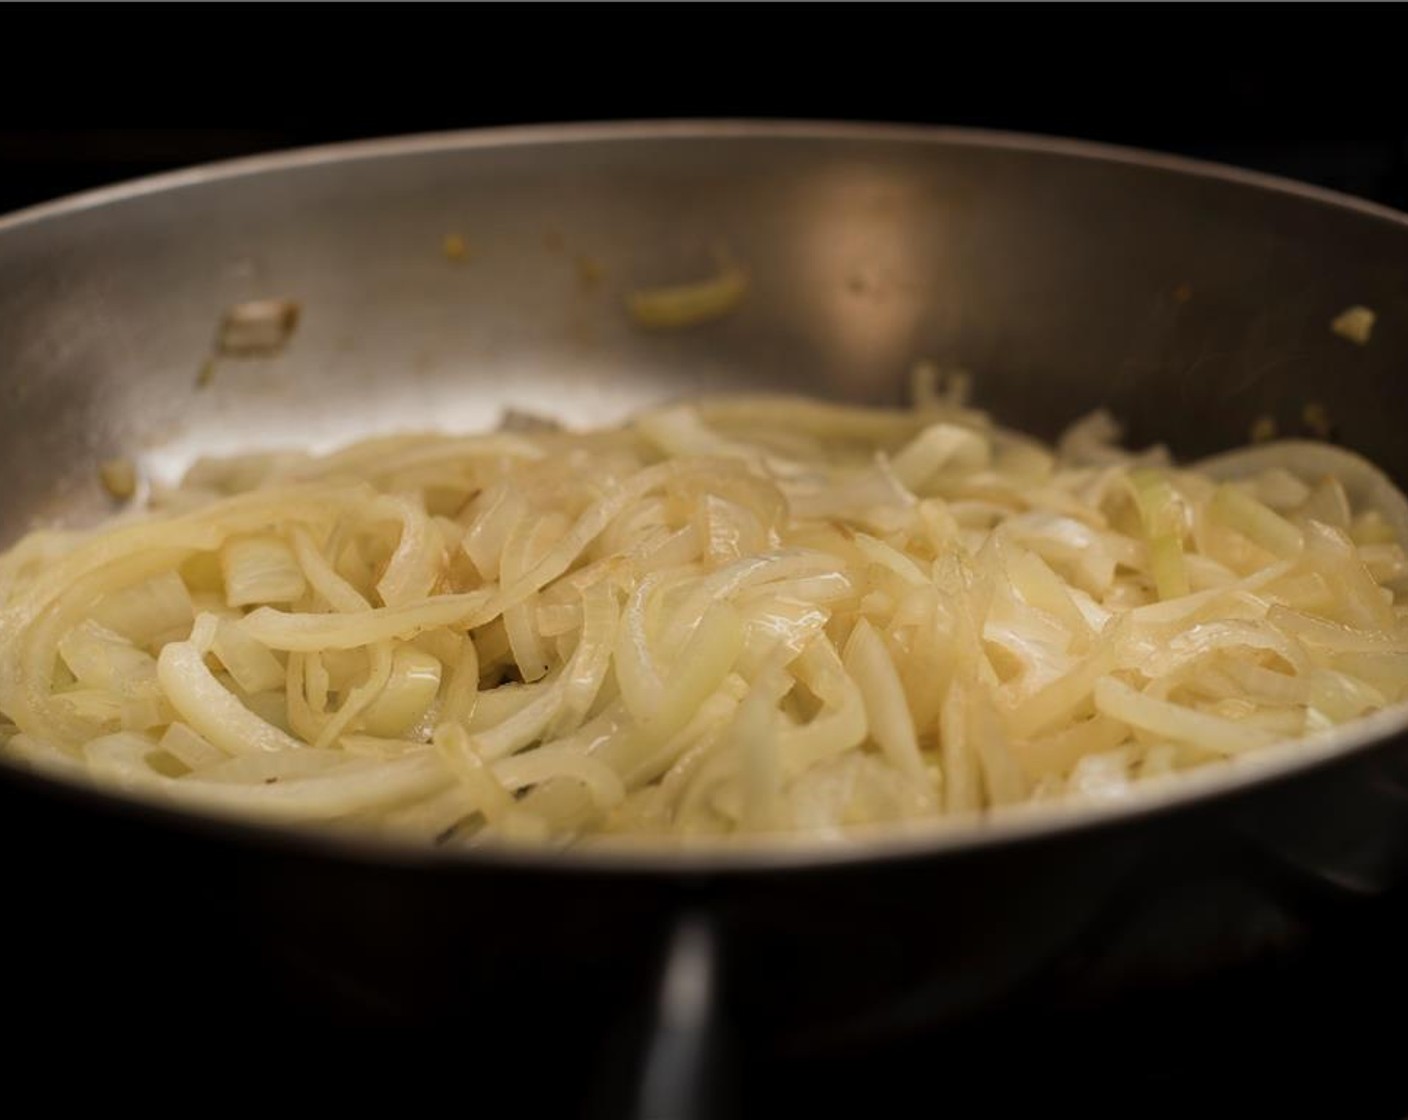 step 4 To caramelize onions, Melt the Unsalted Butter (2 Tbsp) and Olive Oil (2 Tbsp) in a large saute pan over medium heat. Add the Yellow Onions (3). Cook, stirring occasionally for 35 to 40 minutes until soft and caramelized.